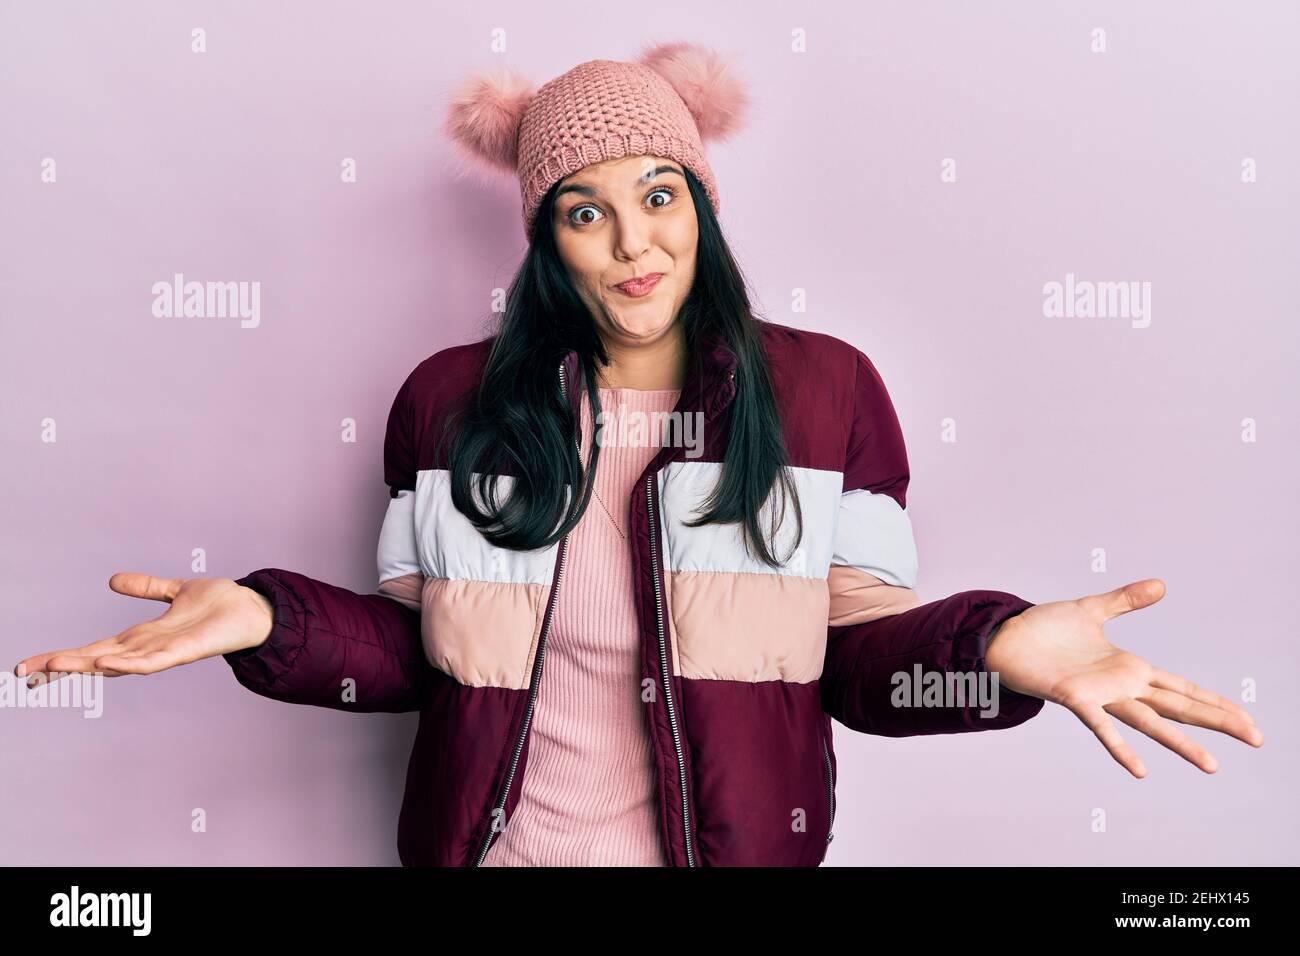 Young hispanic woman wearing wool winter sweater and cap clueless and confused expression with arms and hands raised. doubt concept. Stock Photo